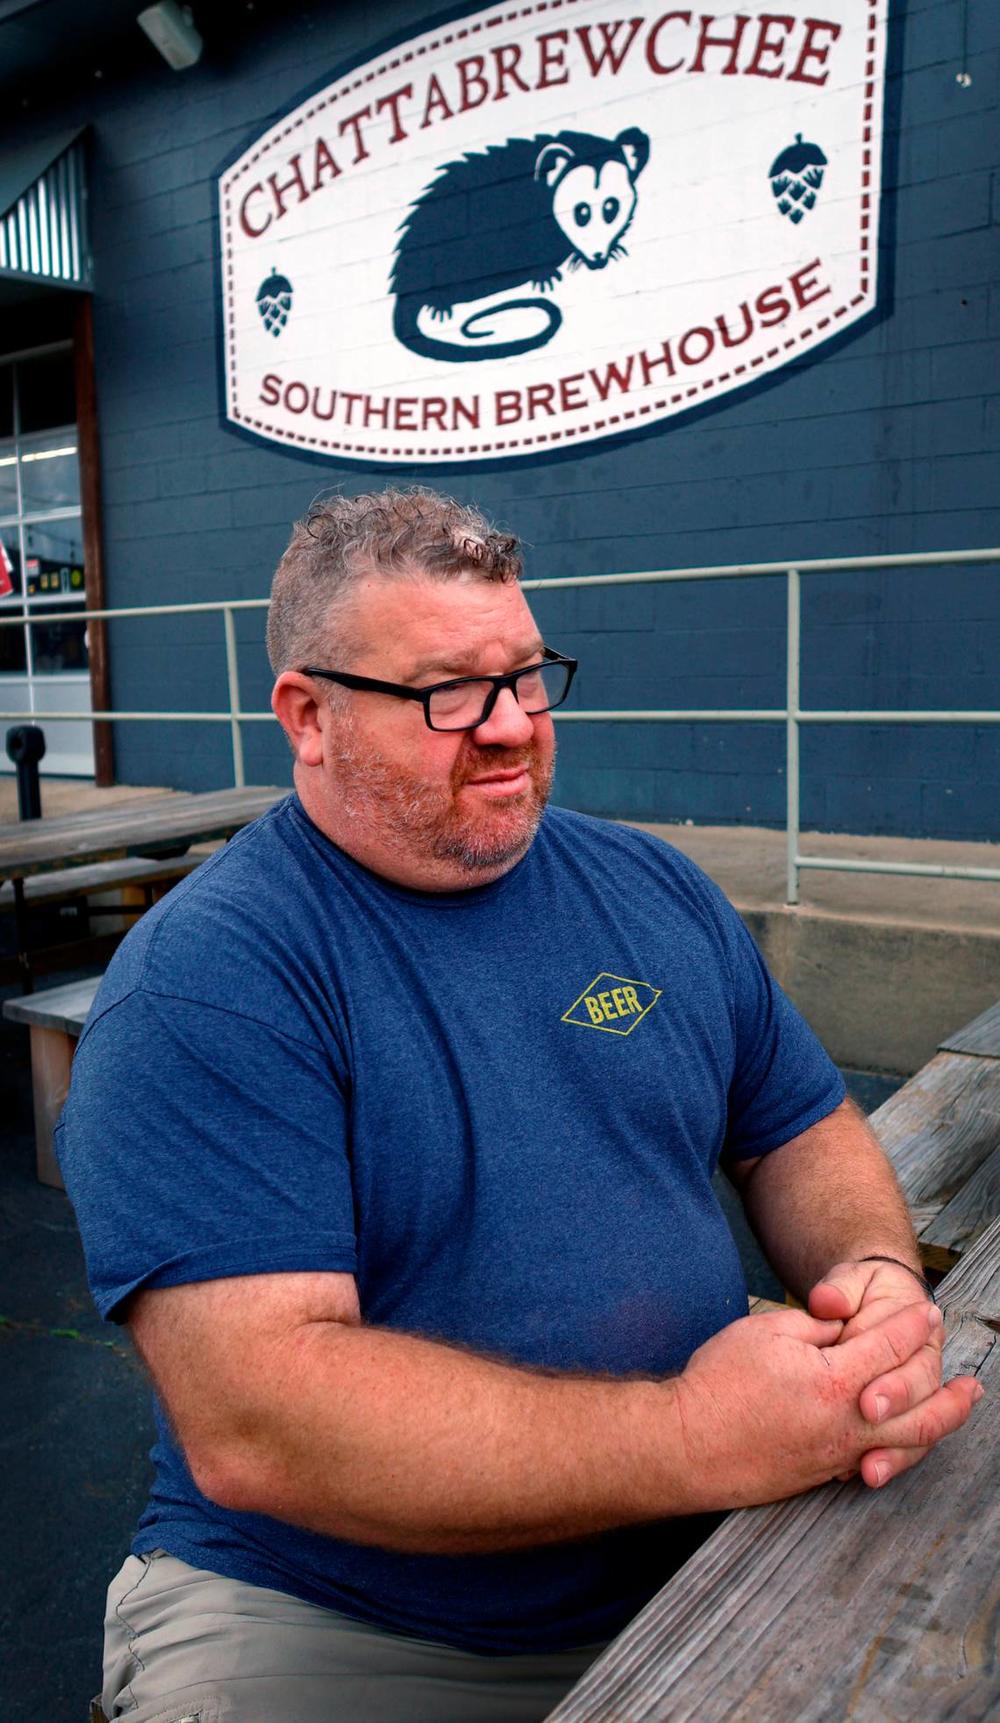 Beau Neal, owner of Chattabrewchee Southern Brewhouse.